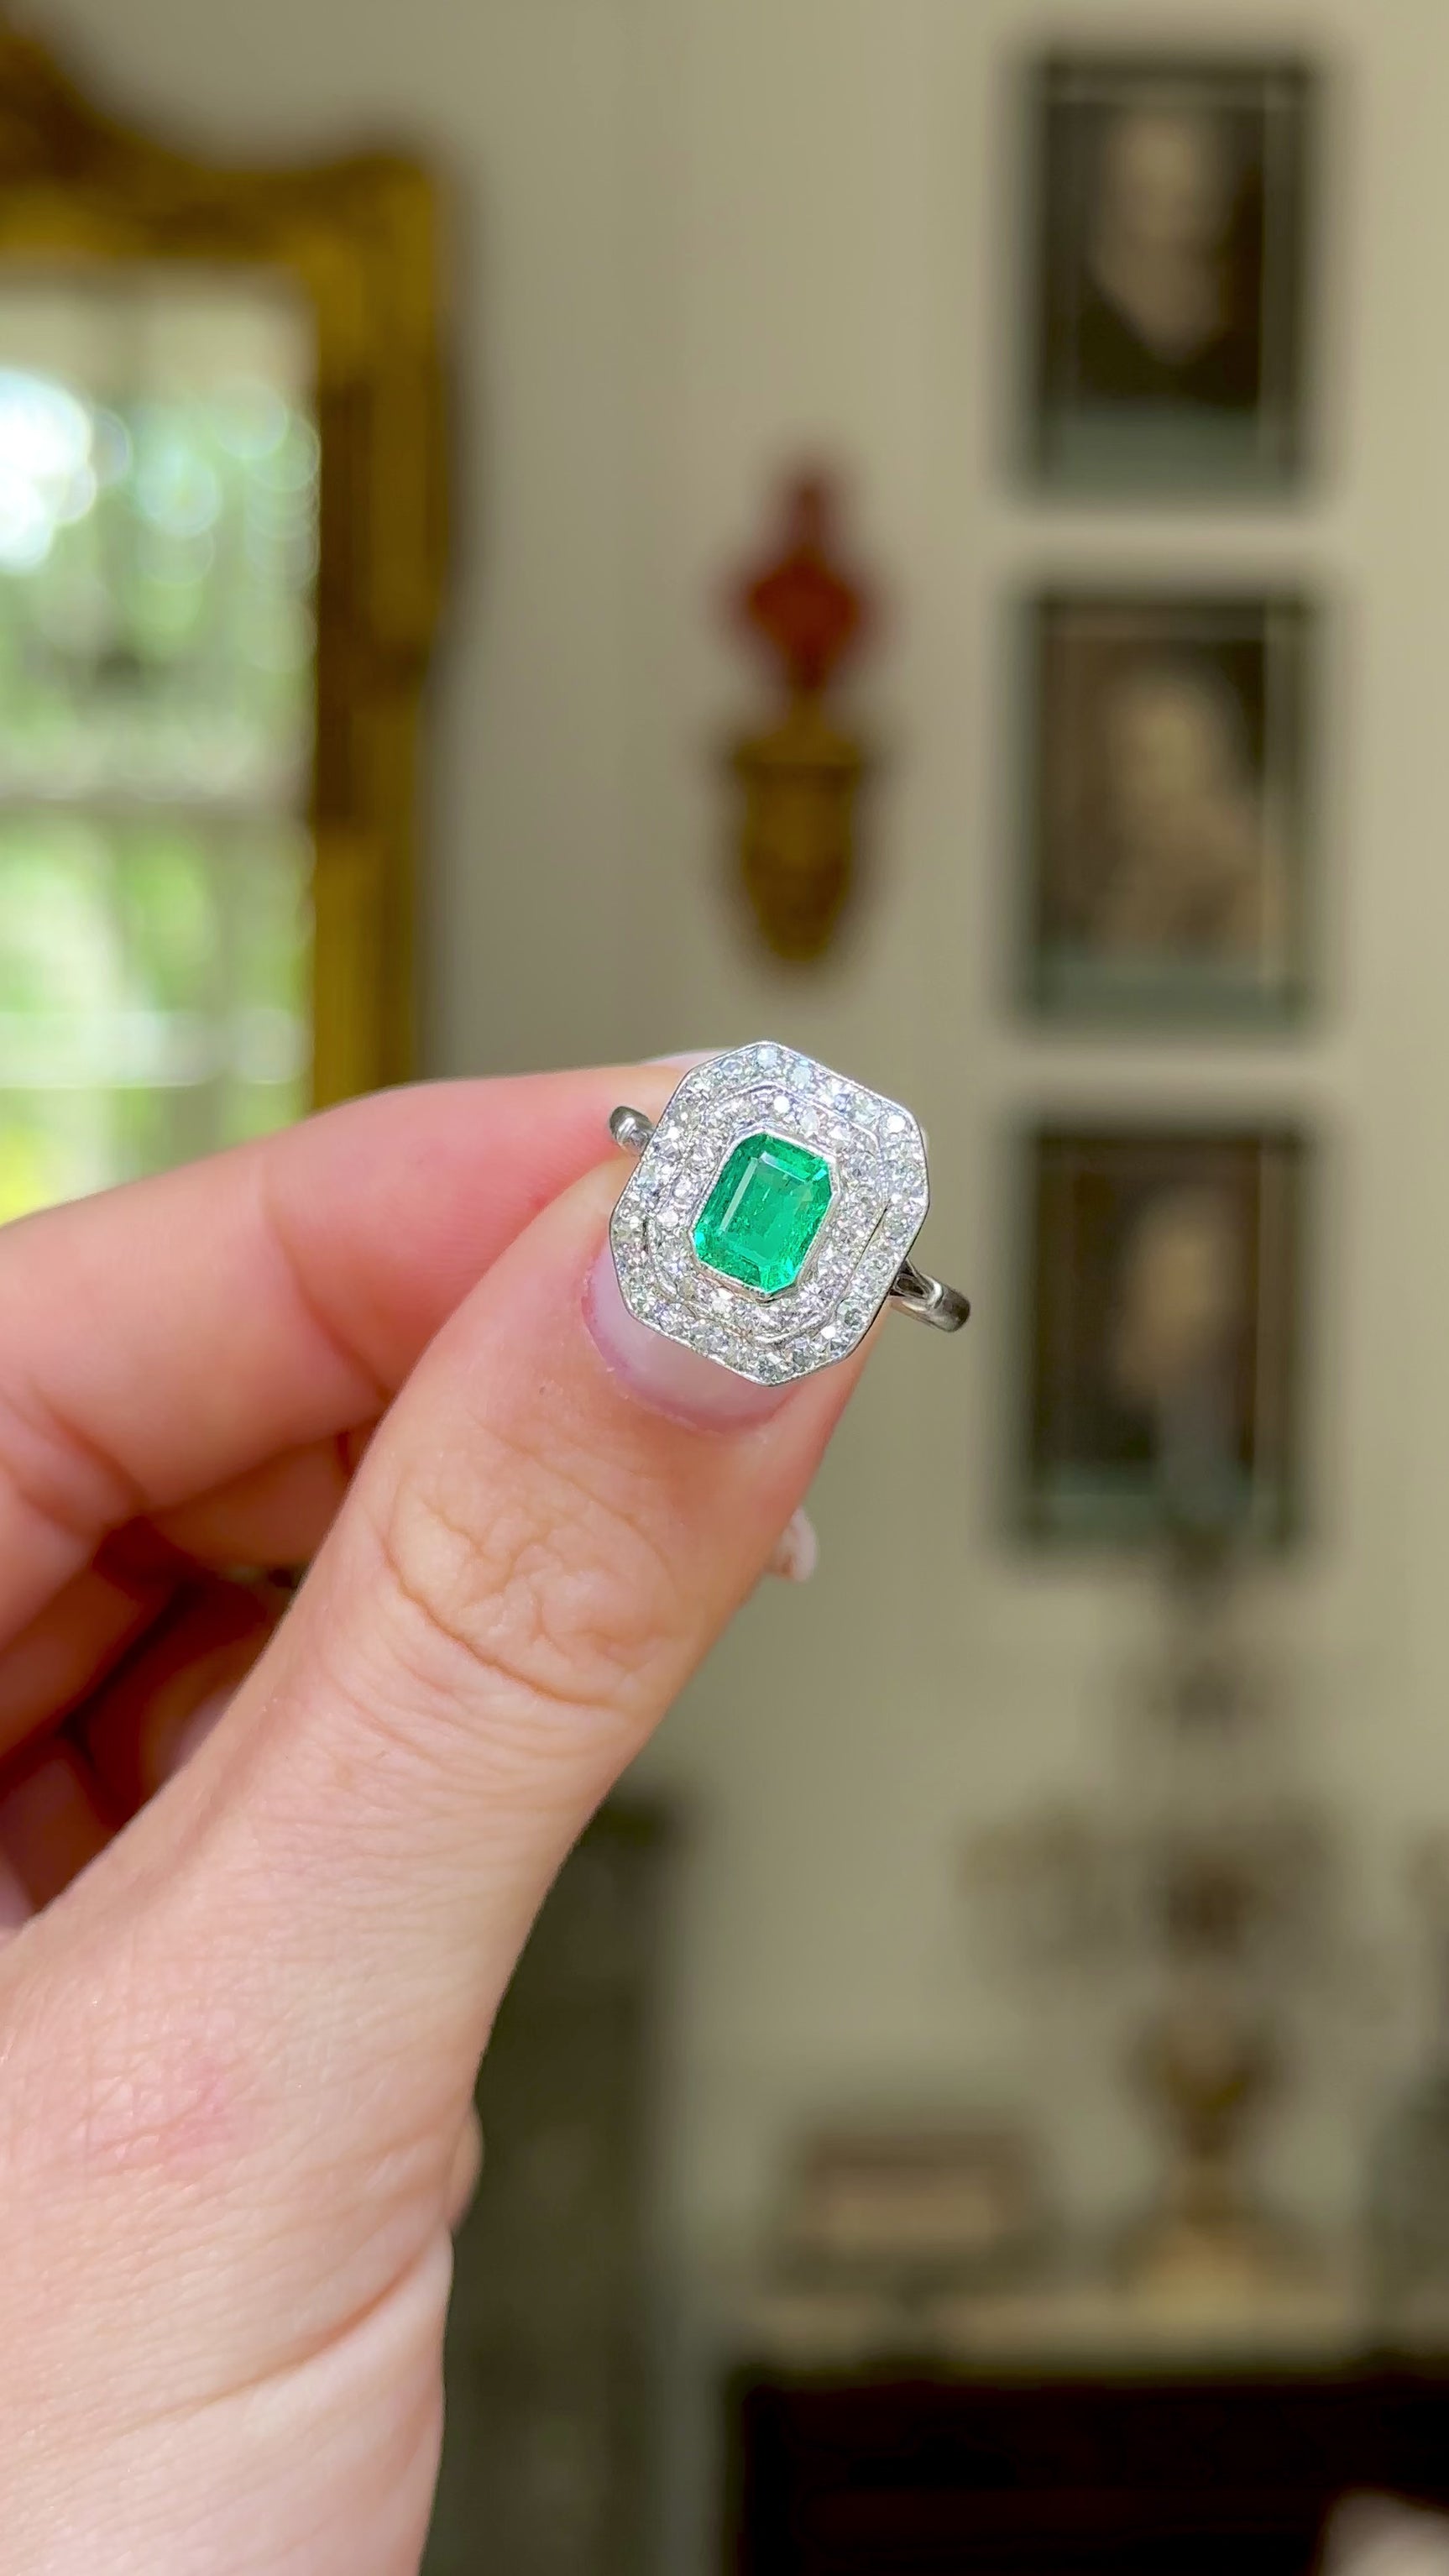 Vintage emerald and diamond cluster ring, held in fingers and moved around to give perspective.